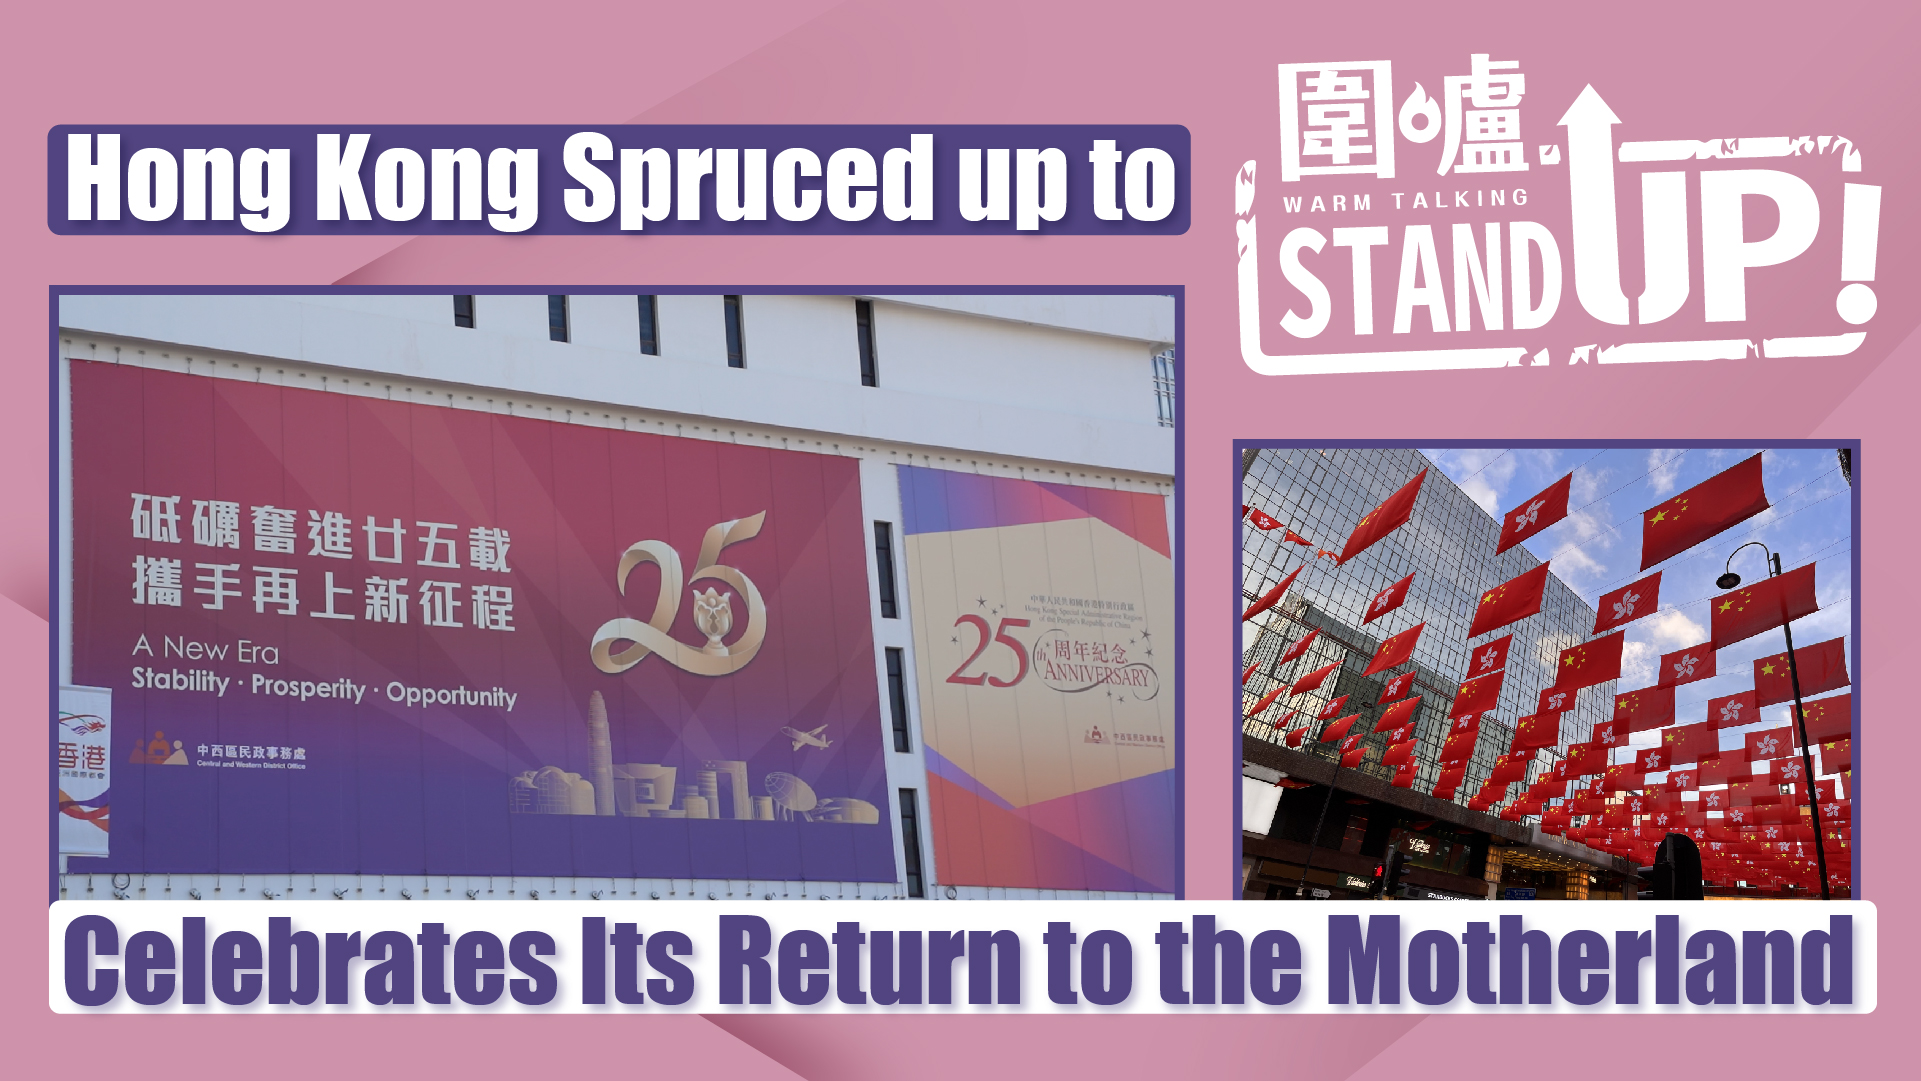 StandUp | Hong Kong Spruced up to Celebrate Its Return to the Motherland